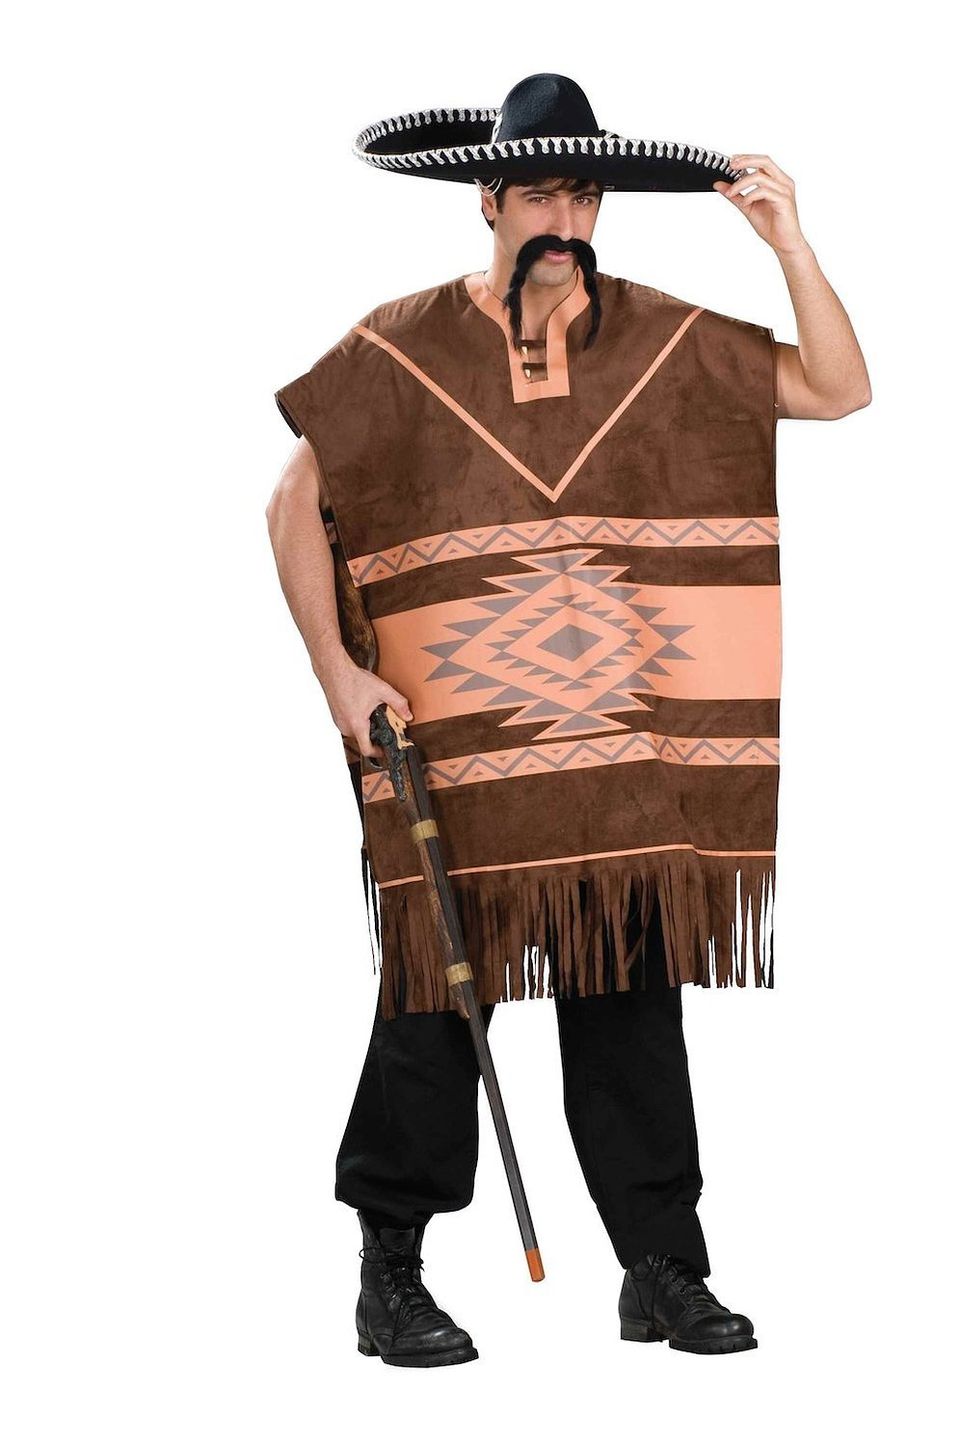 14 'Latino' Costumes That Should Have Never Been Made, Much Less Worn |  HuffPost Voices